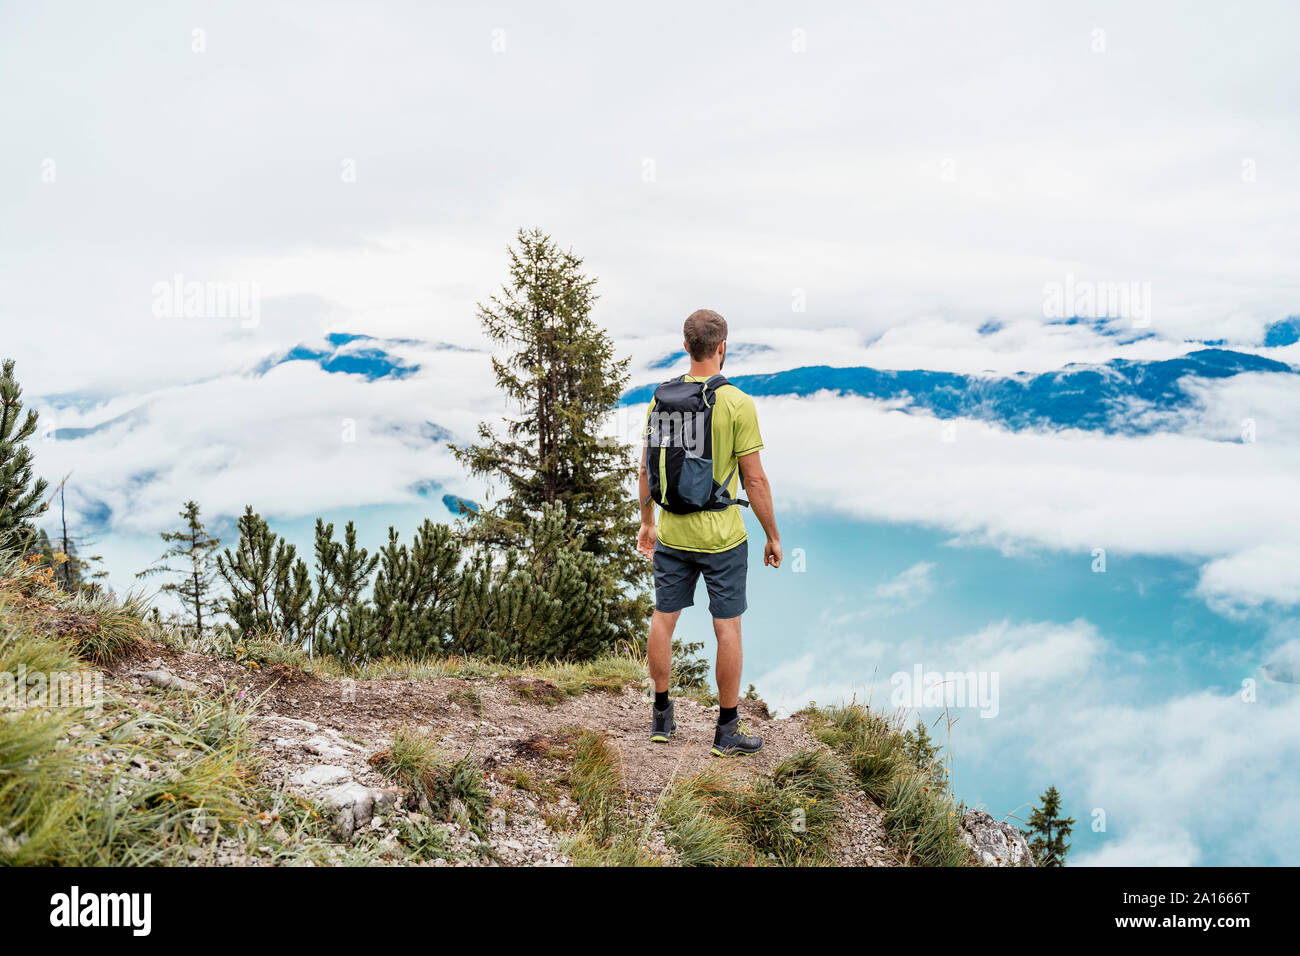 Young man on a hiking trip in the mountains looking at view, Herzogstand, Bavaria, Germany Stock Photo